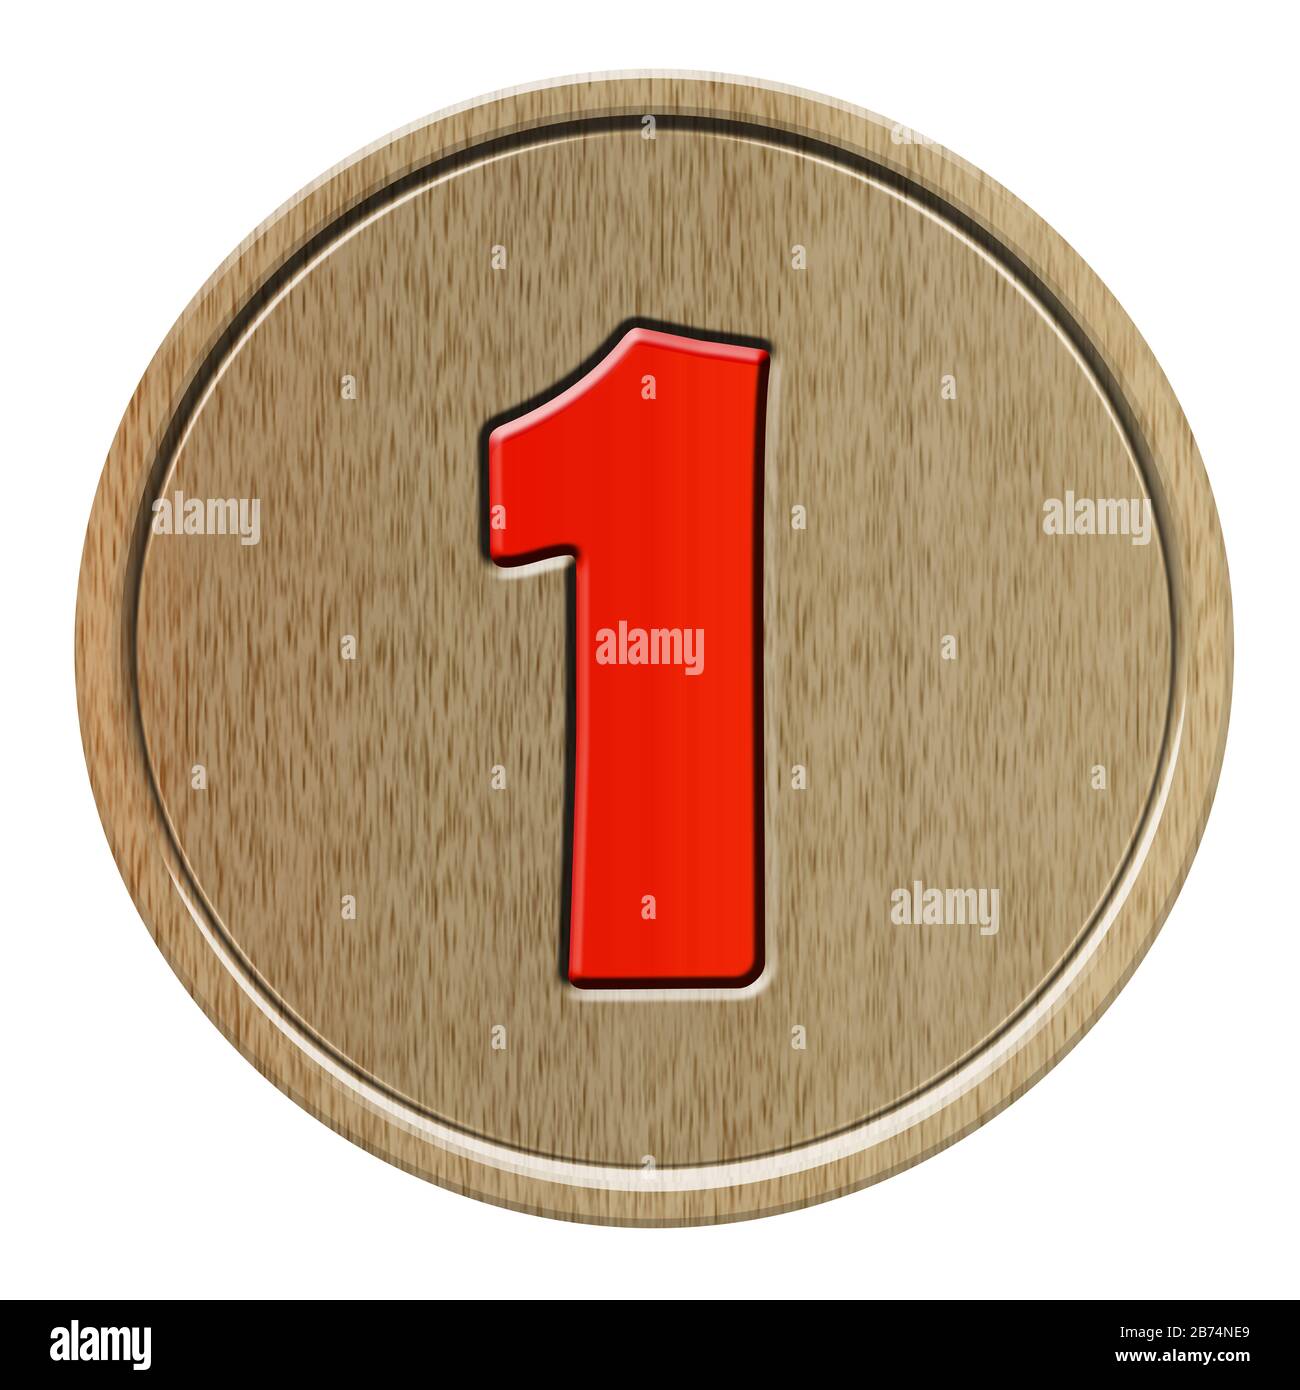 Illustration of a number on wooden button Stock Photo